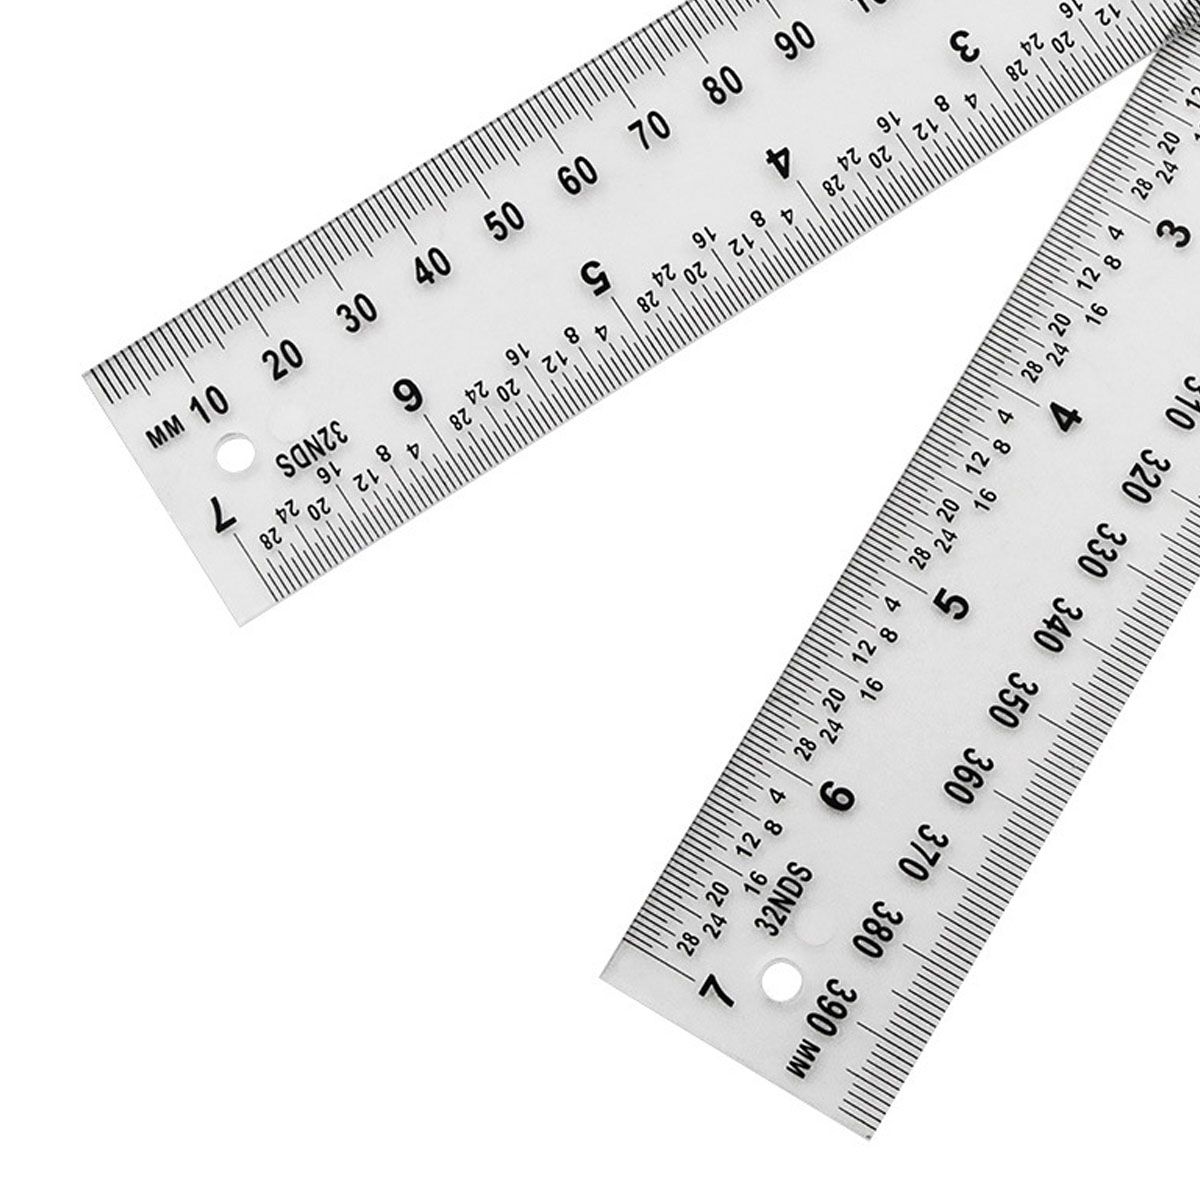 Digital-Angle-Meter-Inclinometer-Digital-Angle-Ruler-Electronic-Goniometer-Protractor-Angle-Finder-M-1738788